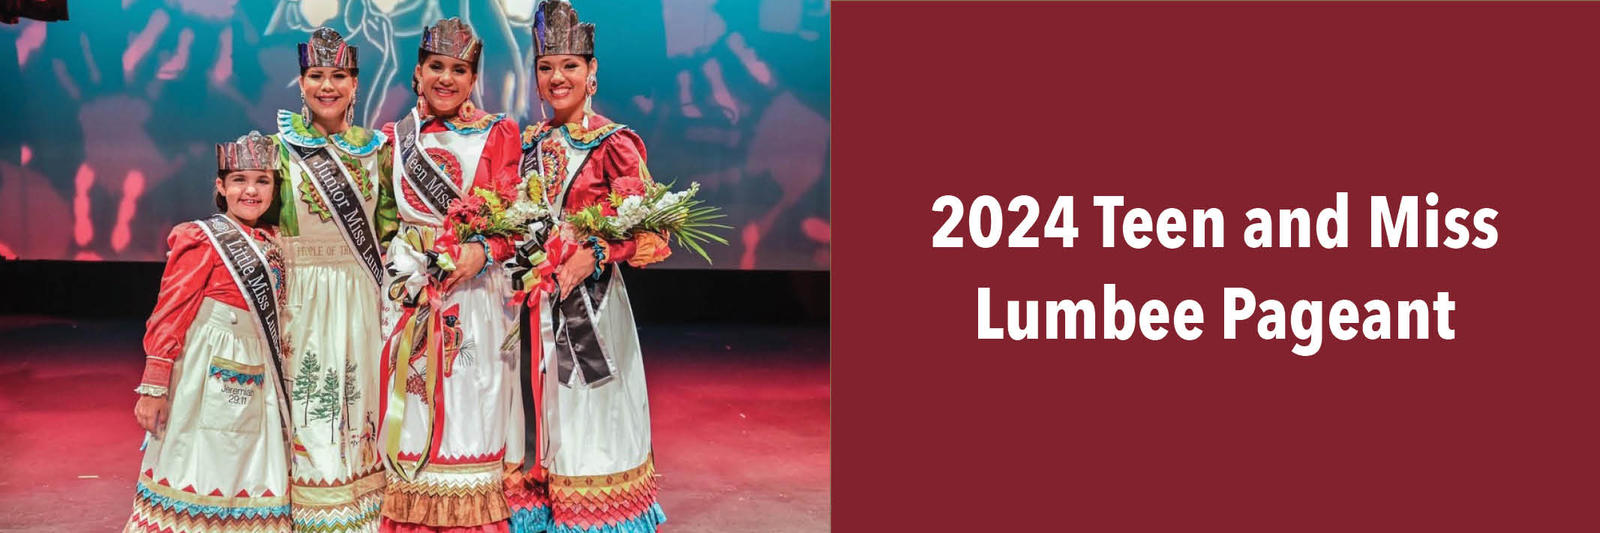 Teen and Miss Lumbee Pageant